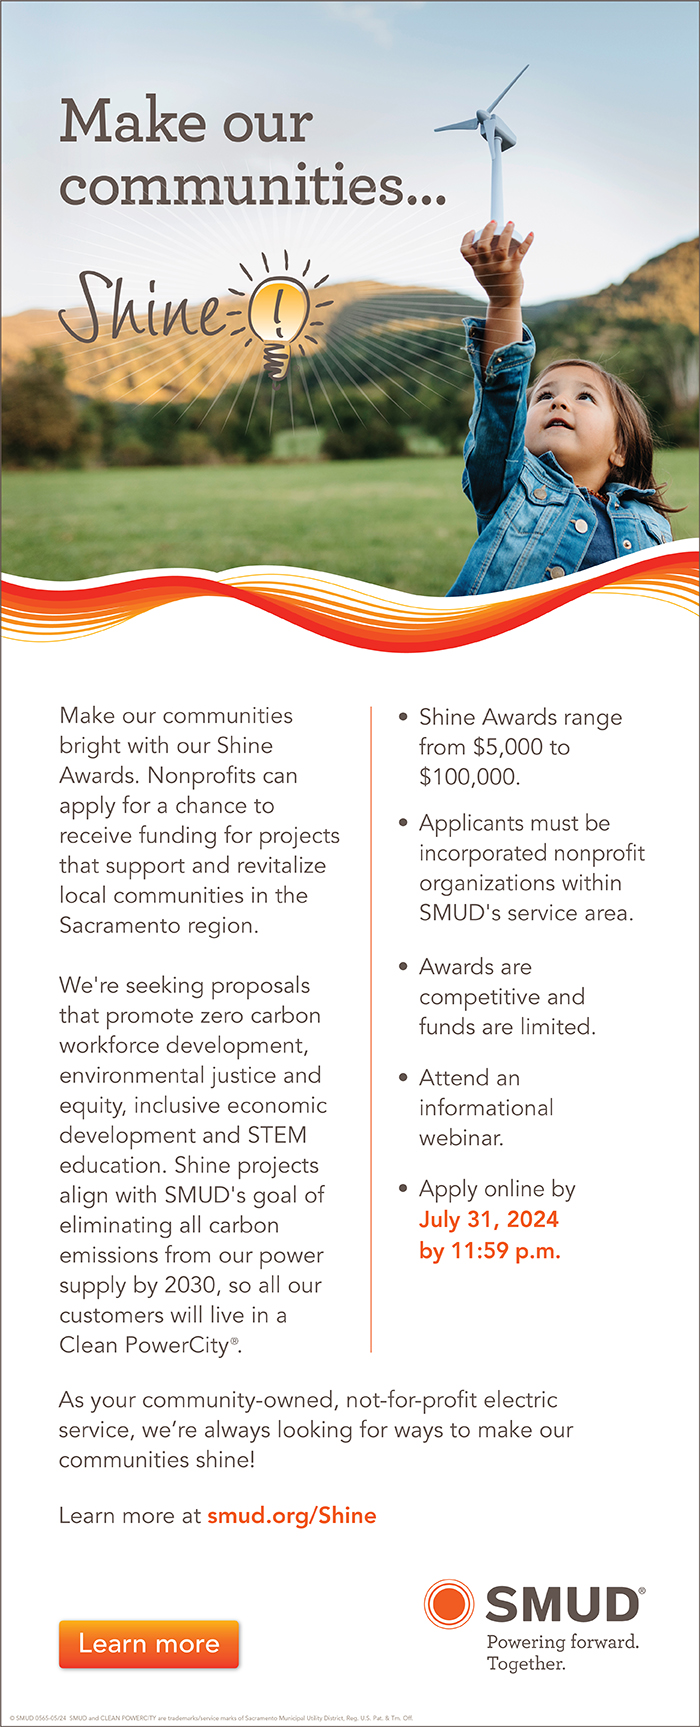 SMUD is now accepting applications from nonprofits for SHINE Awards